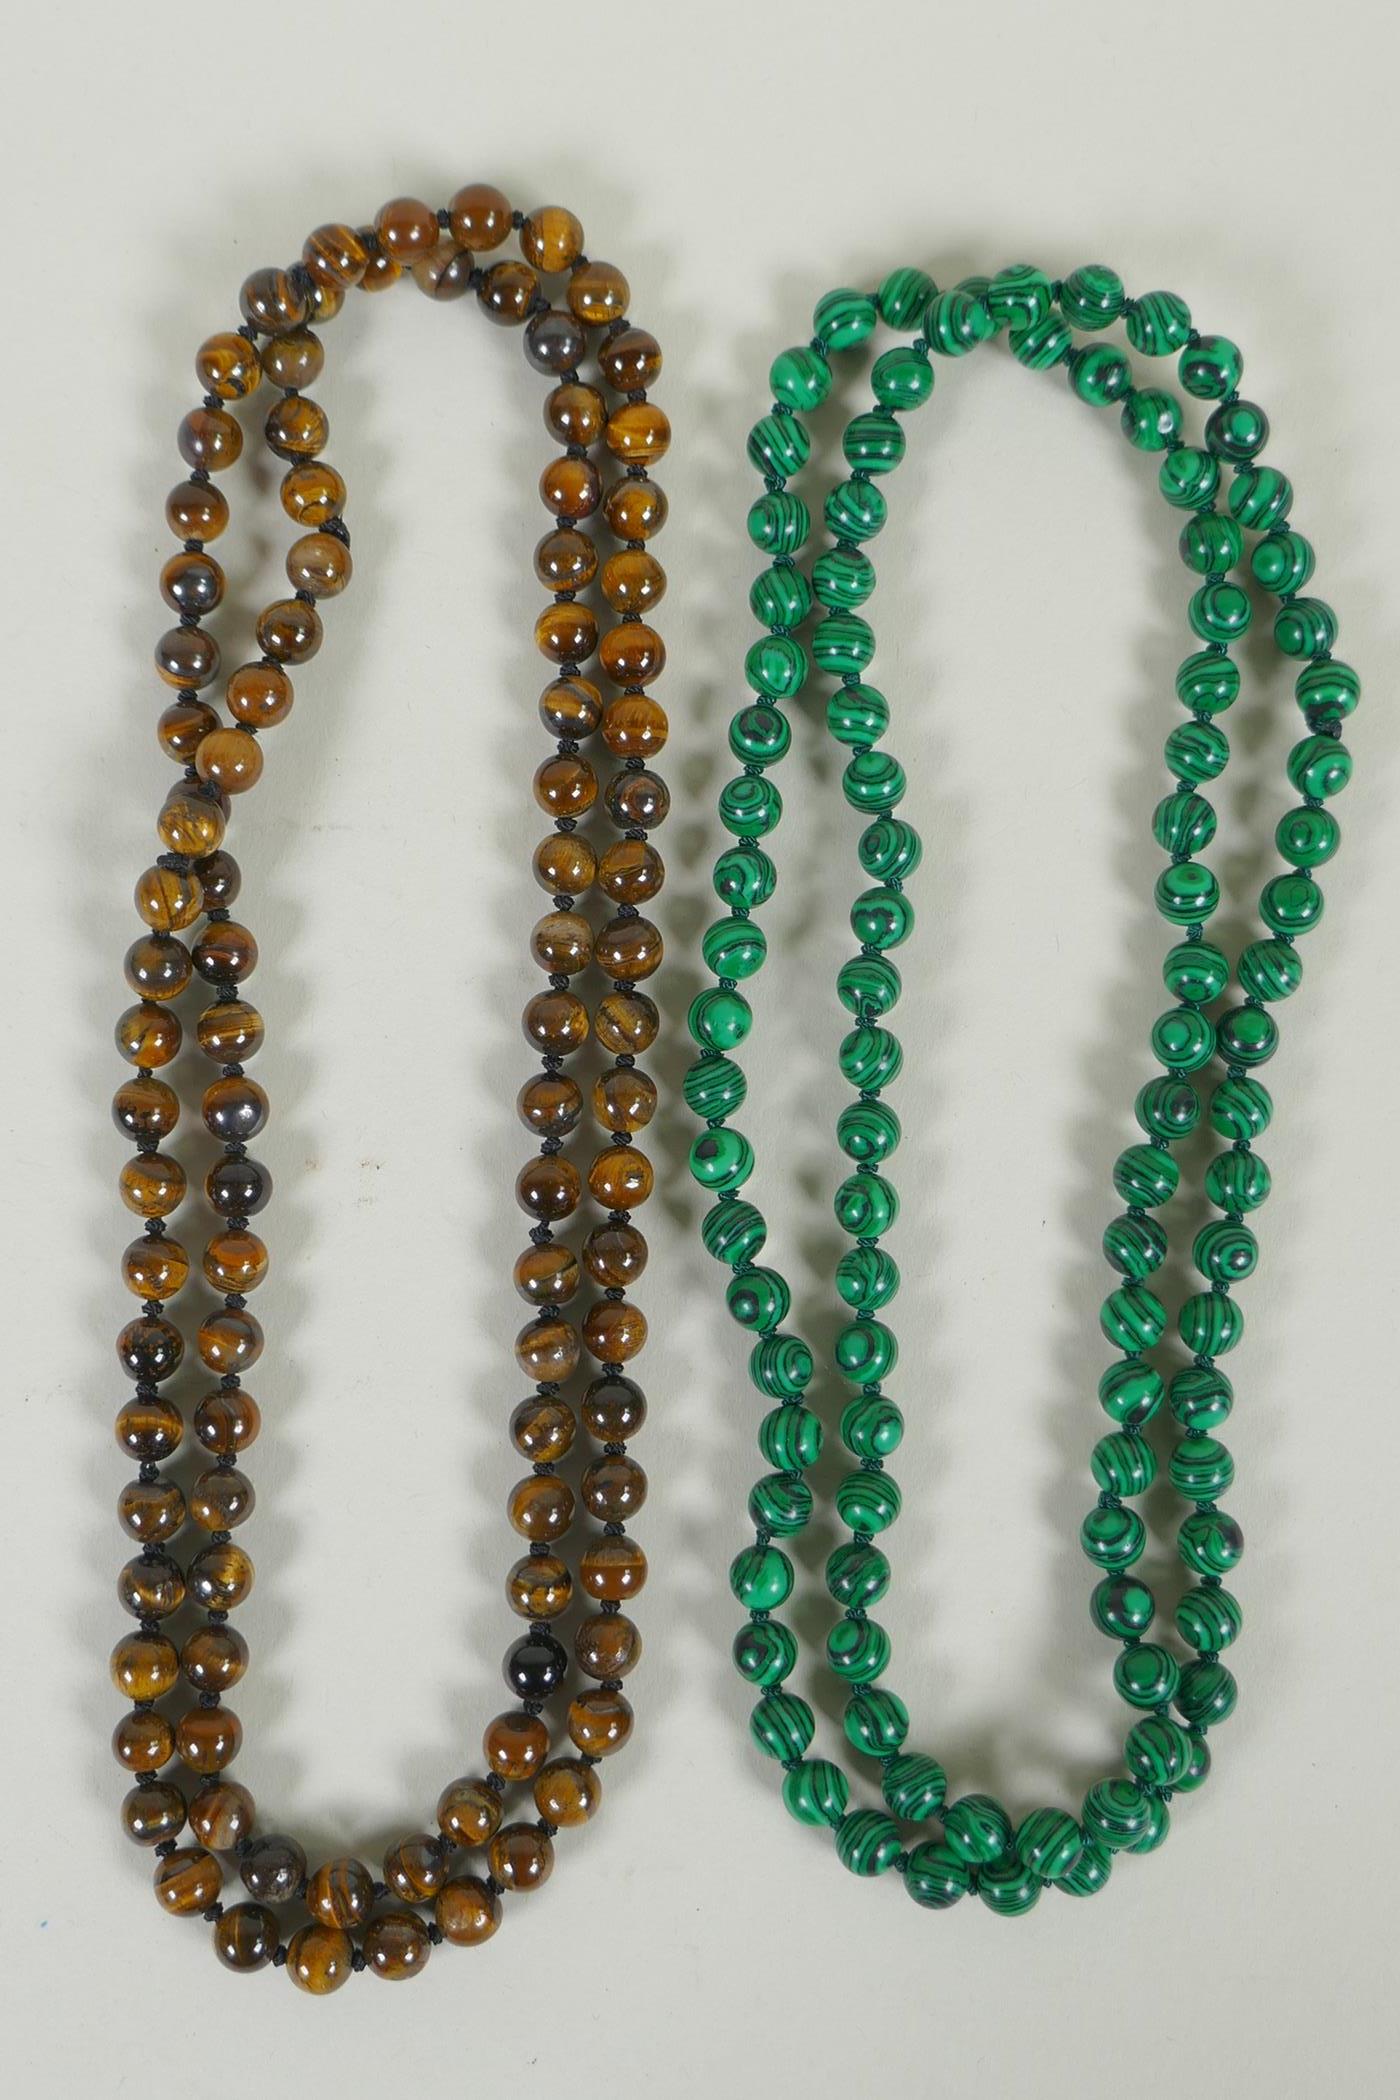 A string of tiger's eye beads, and a string of malachite style beads, longest 95cm